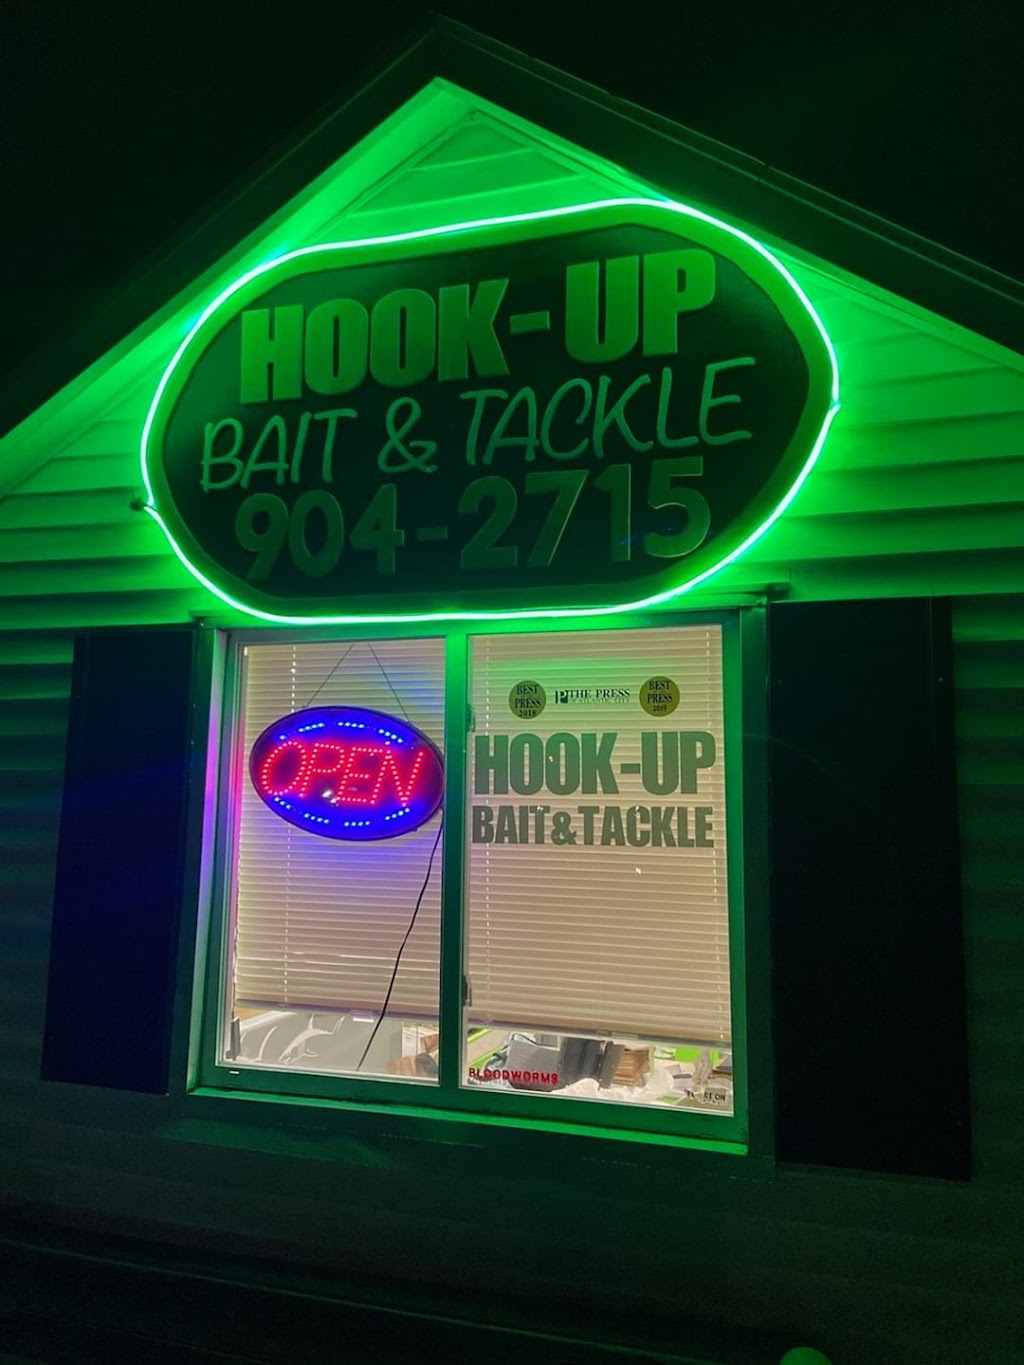 Hook-up bait and tackle | 1810 Somers Point mayslanding rd Rd Inside Somerset cove marina, Egg Harbor Township, NJ 08234 | Phone: (609) 904-2715